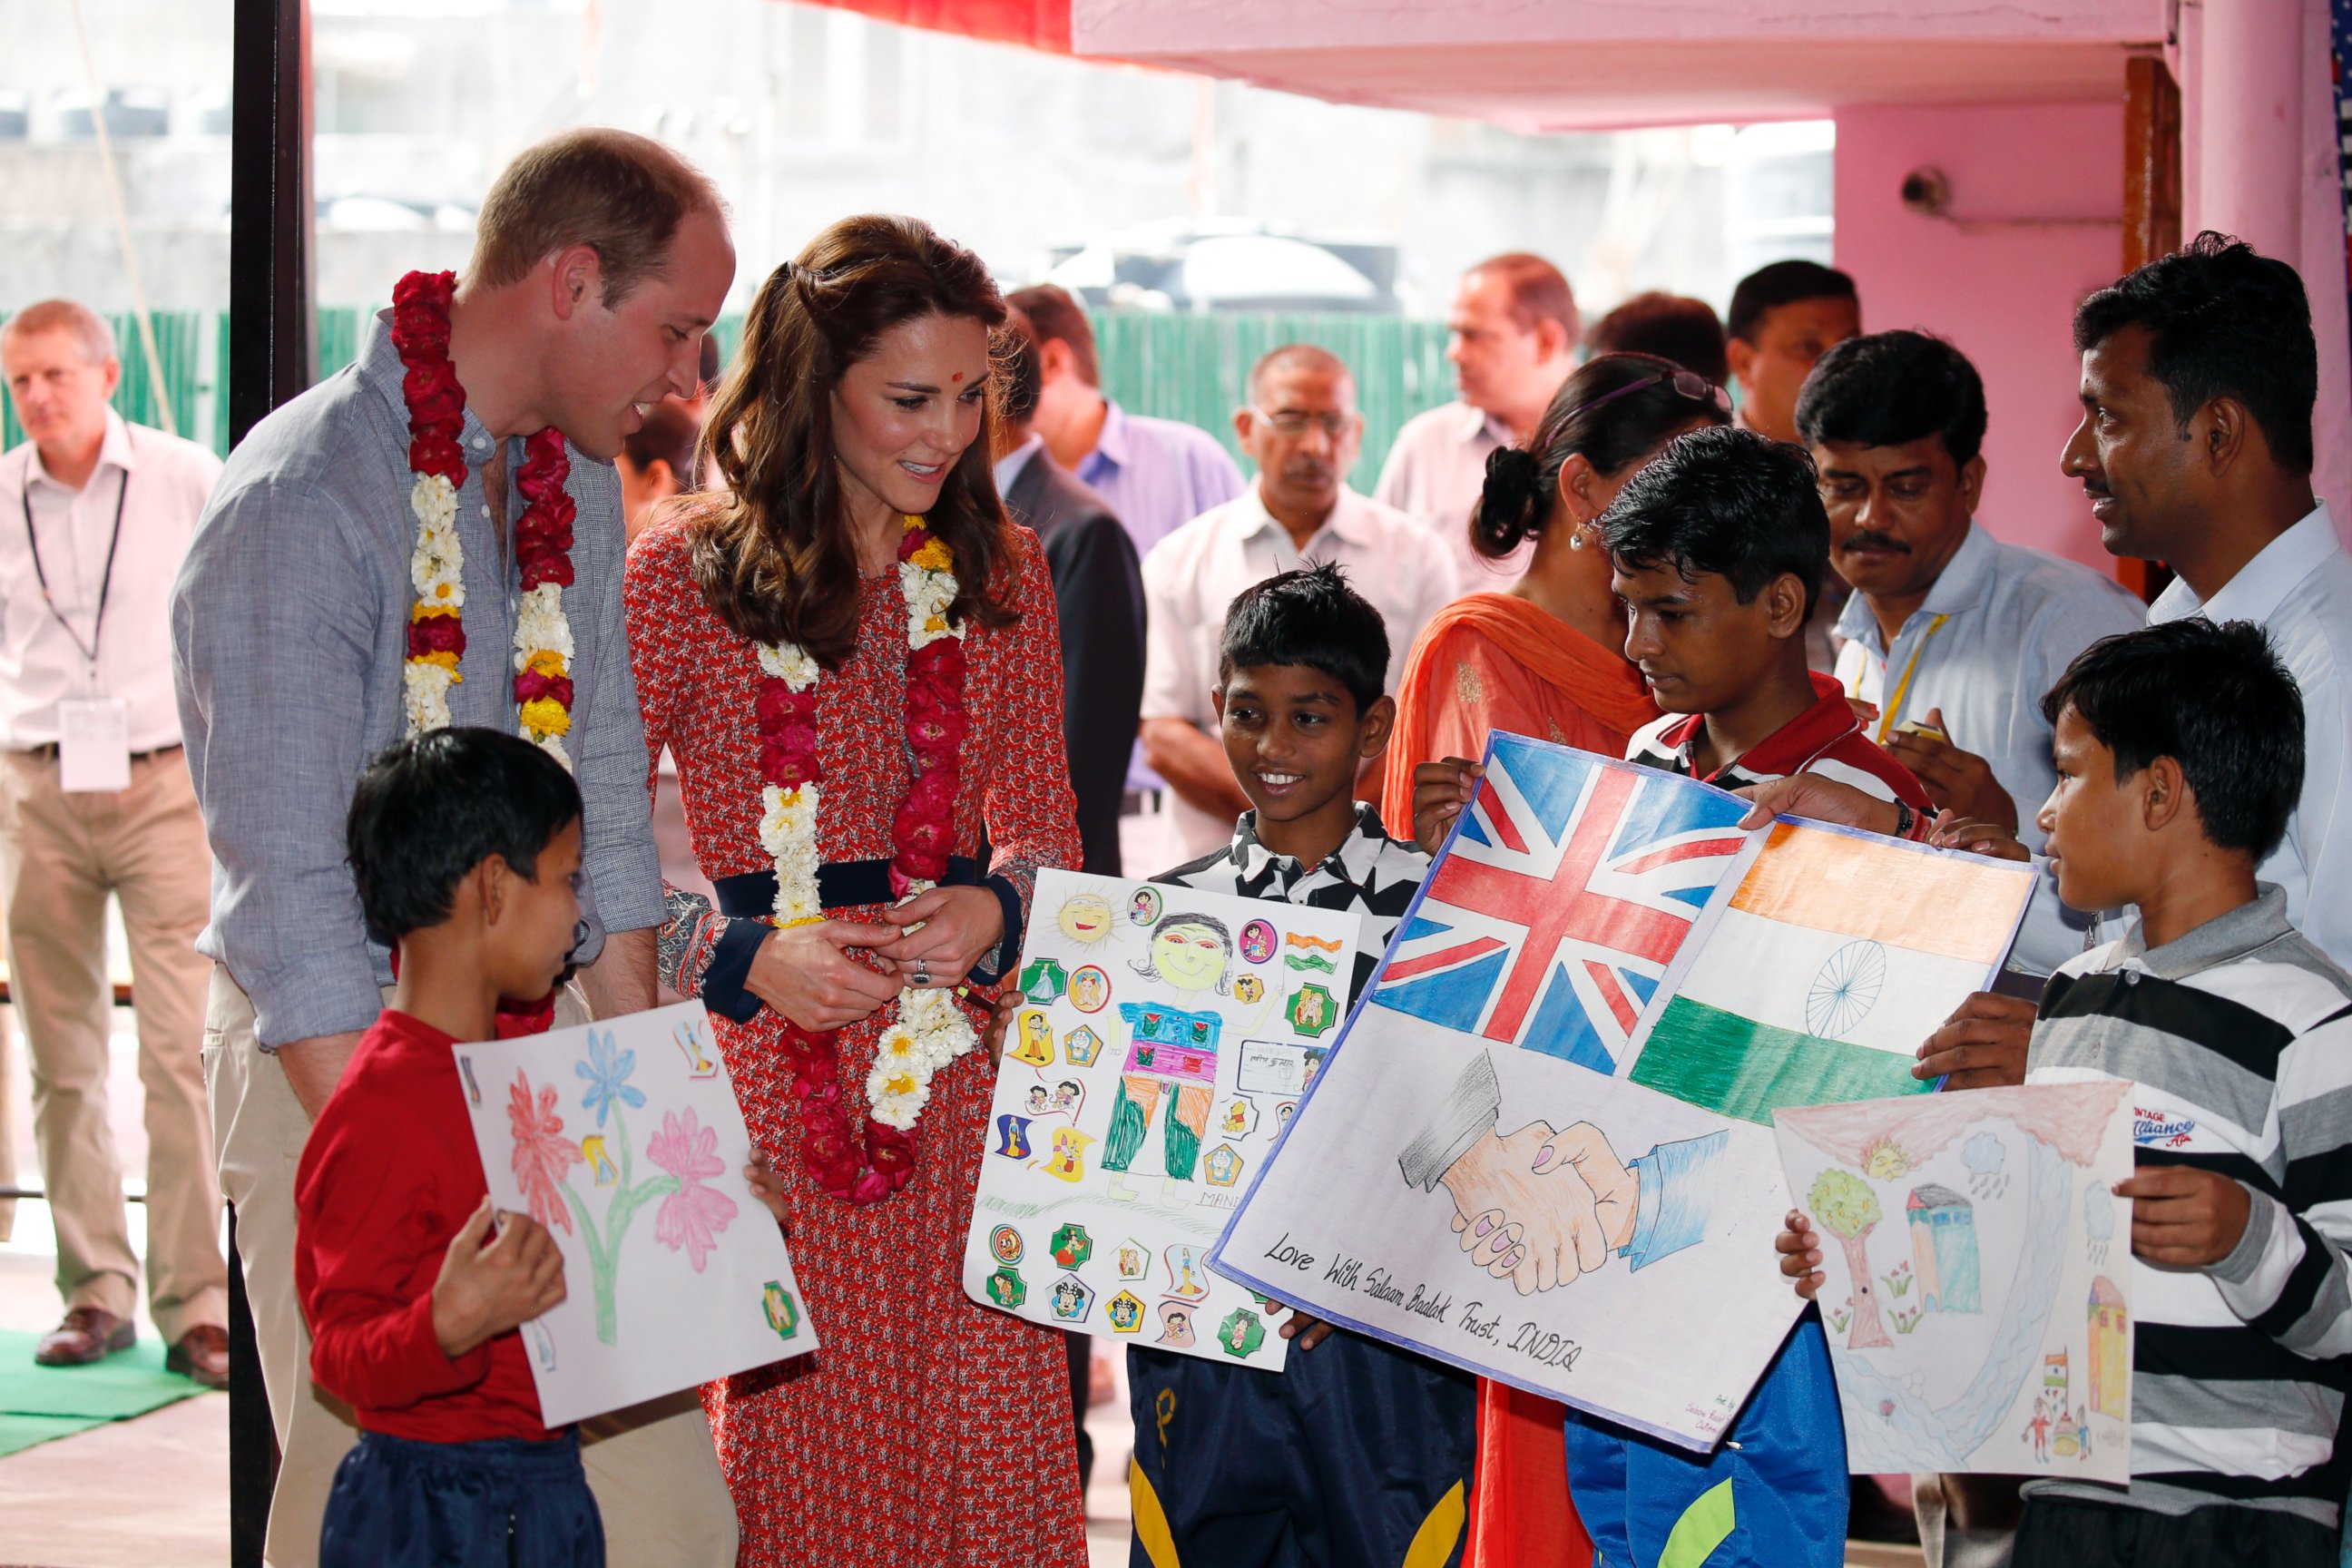 PHOTO: Prince William and Catherine, Duke and Duchess of Cambridge, visit the Salaam Baalak Trust, an organization supporting some of the most vulnerable young people living on the streets in Delhi, April 12, 2016.